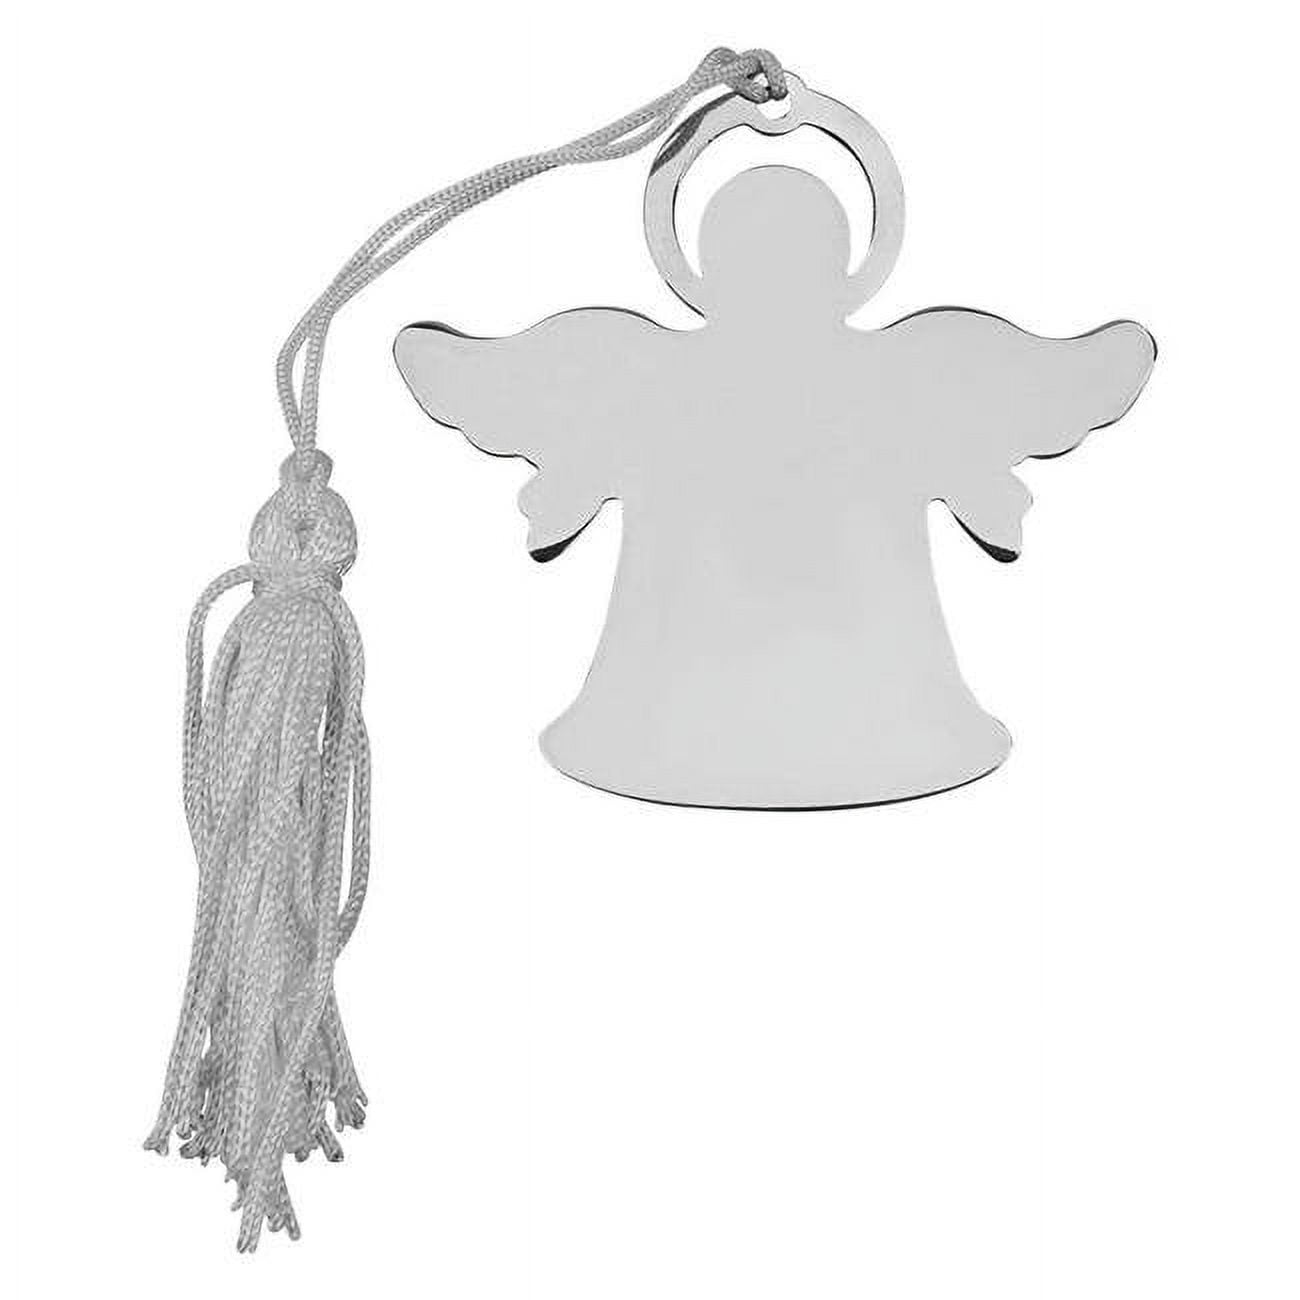 019954 Angel Ornament With White Tassel, Nickel Plated